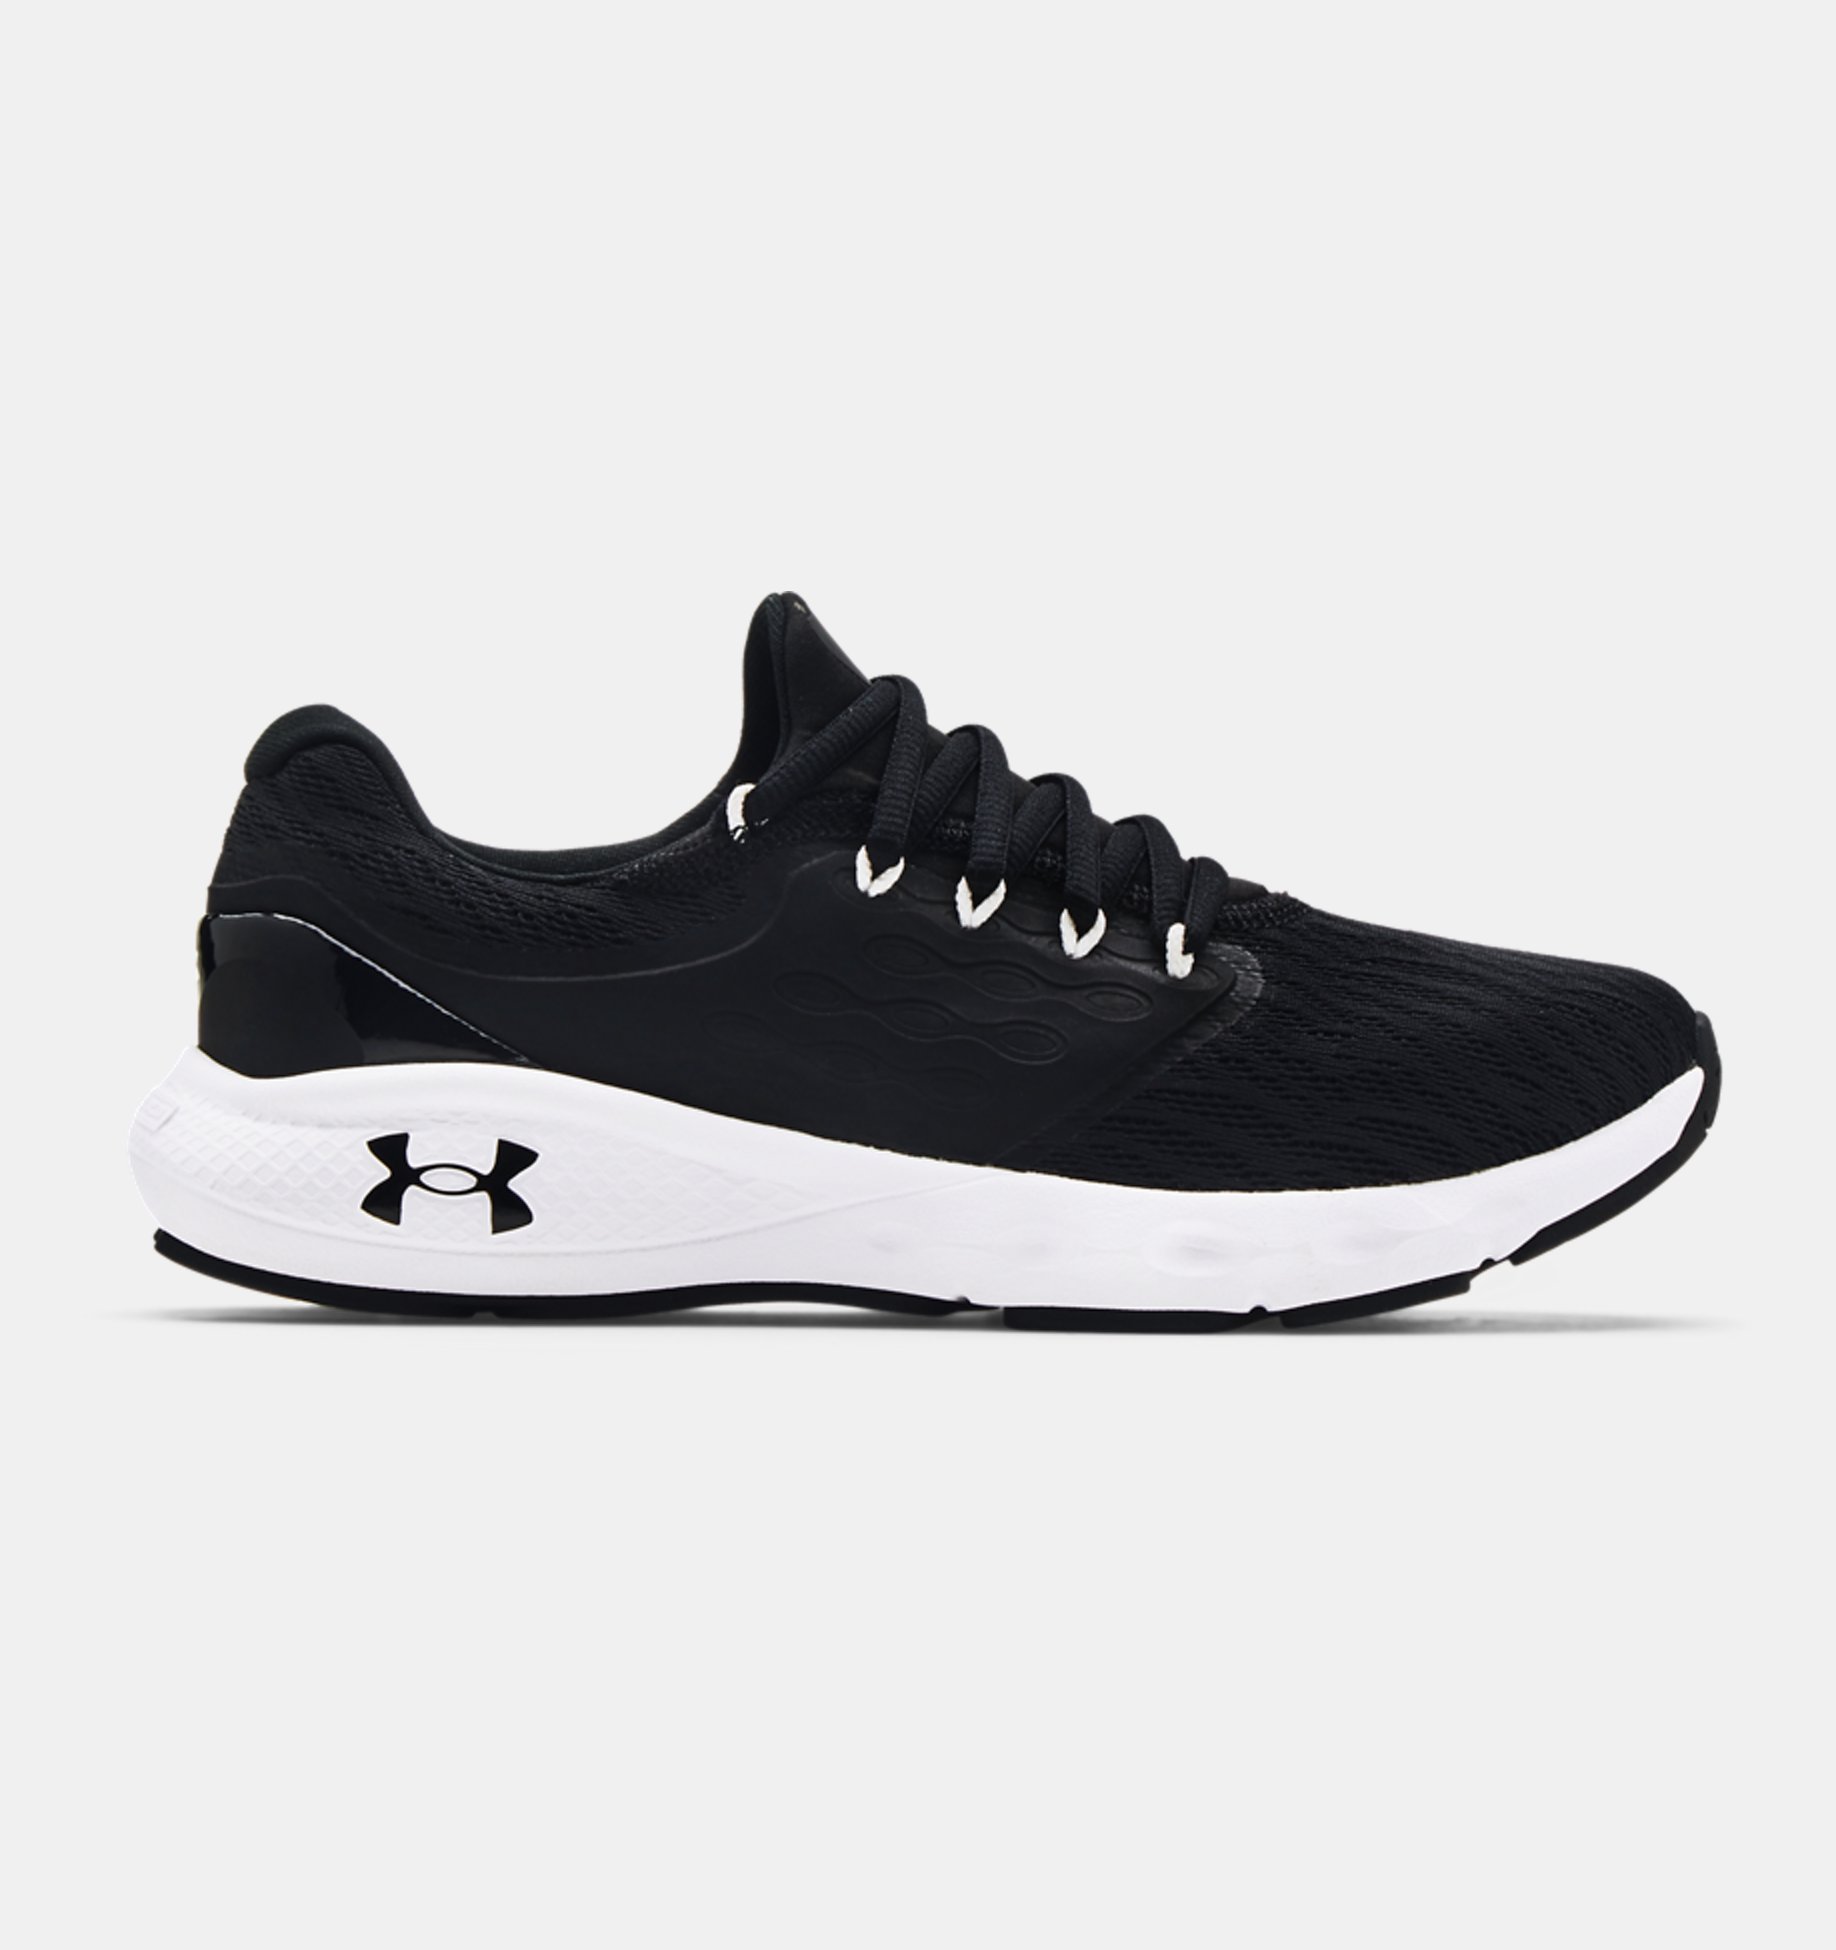 Underarmour Womens UA Charged Vantage Running Shoes